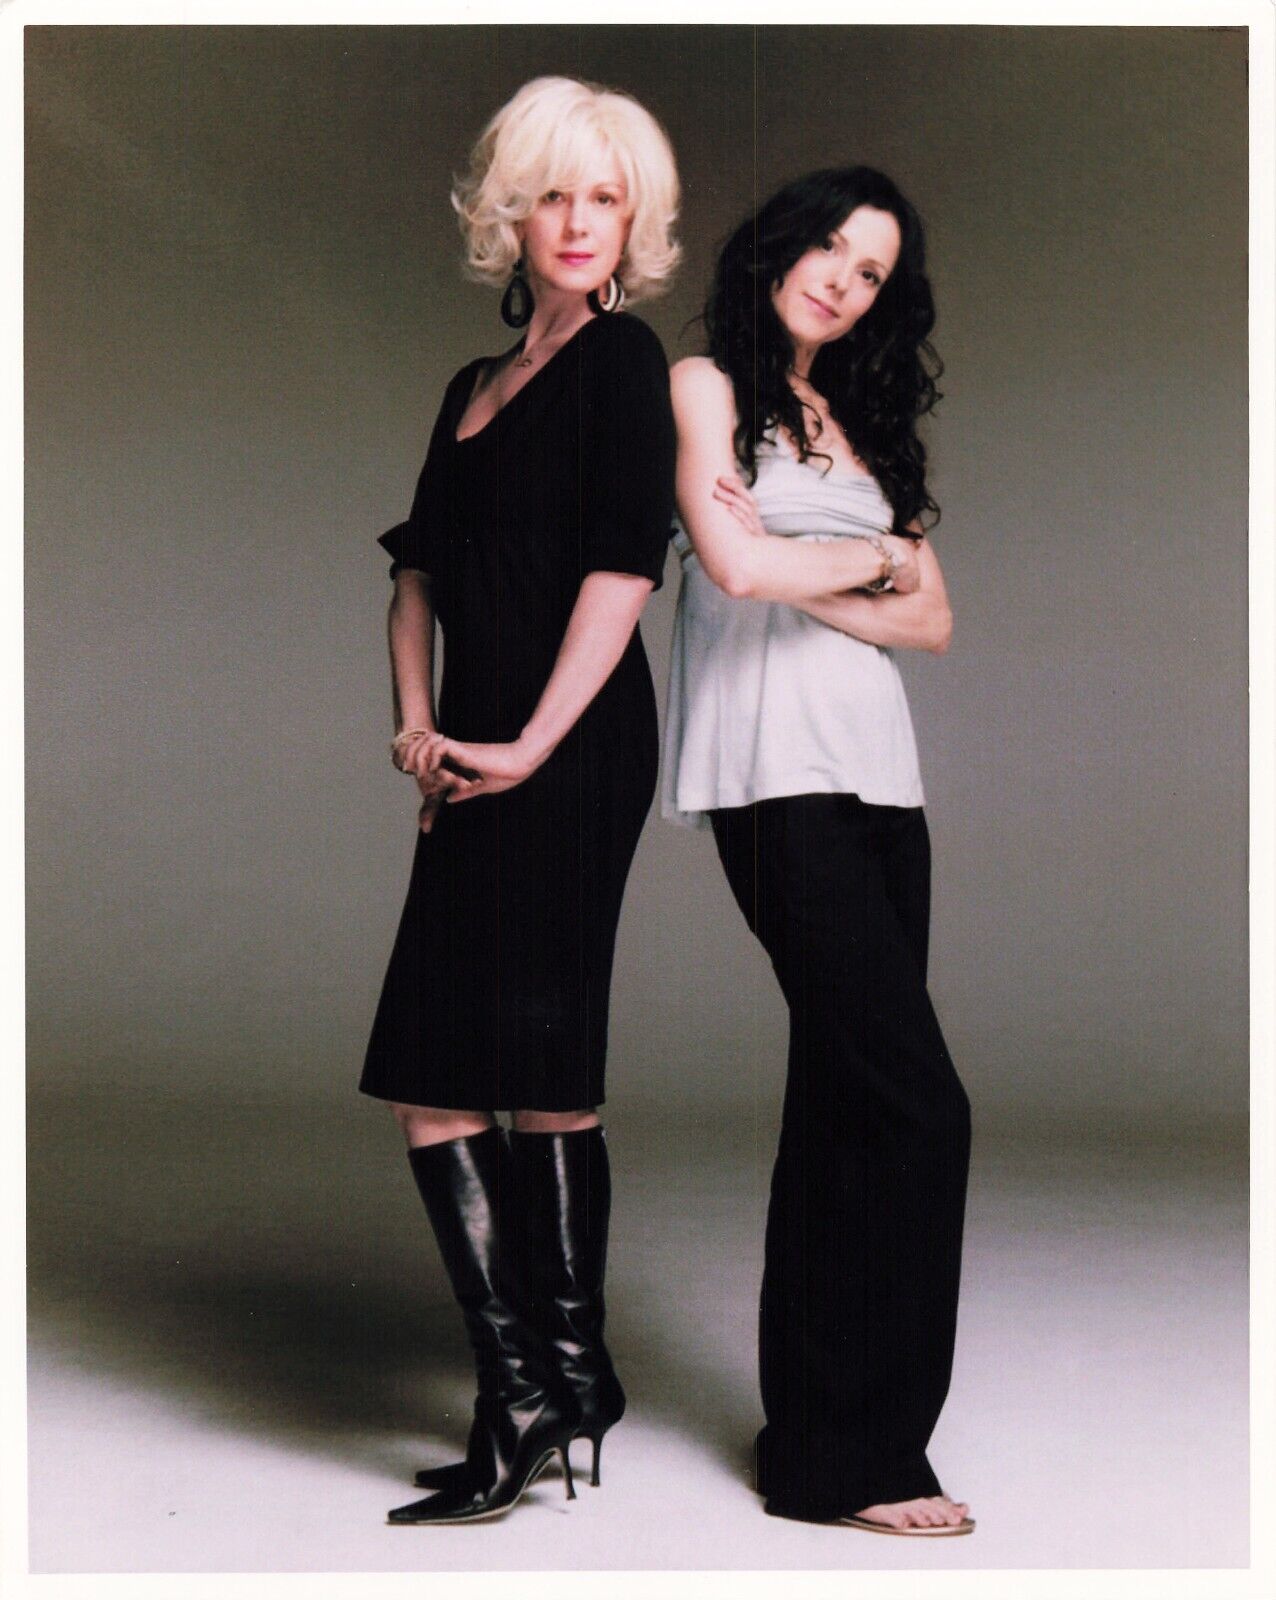 Weeds TV Press Photo 8x10 Mary-Louise Parker Elizabeth Perkins Pin Up *P61b